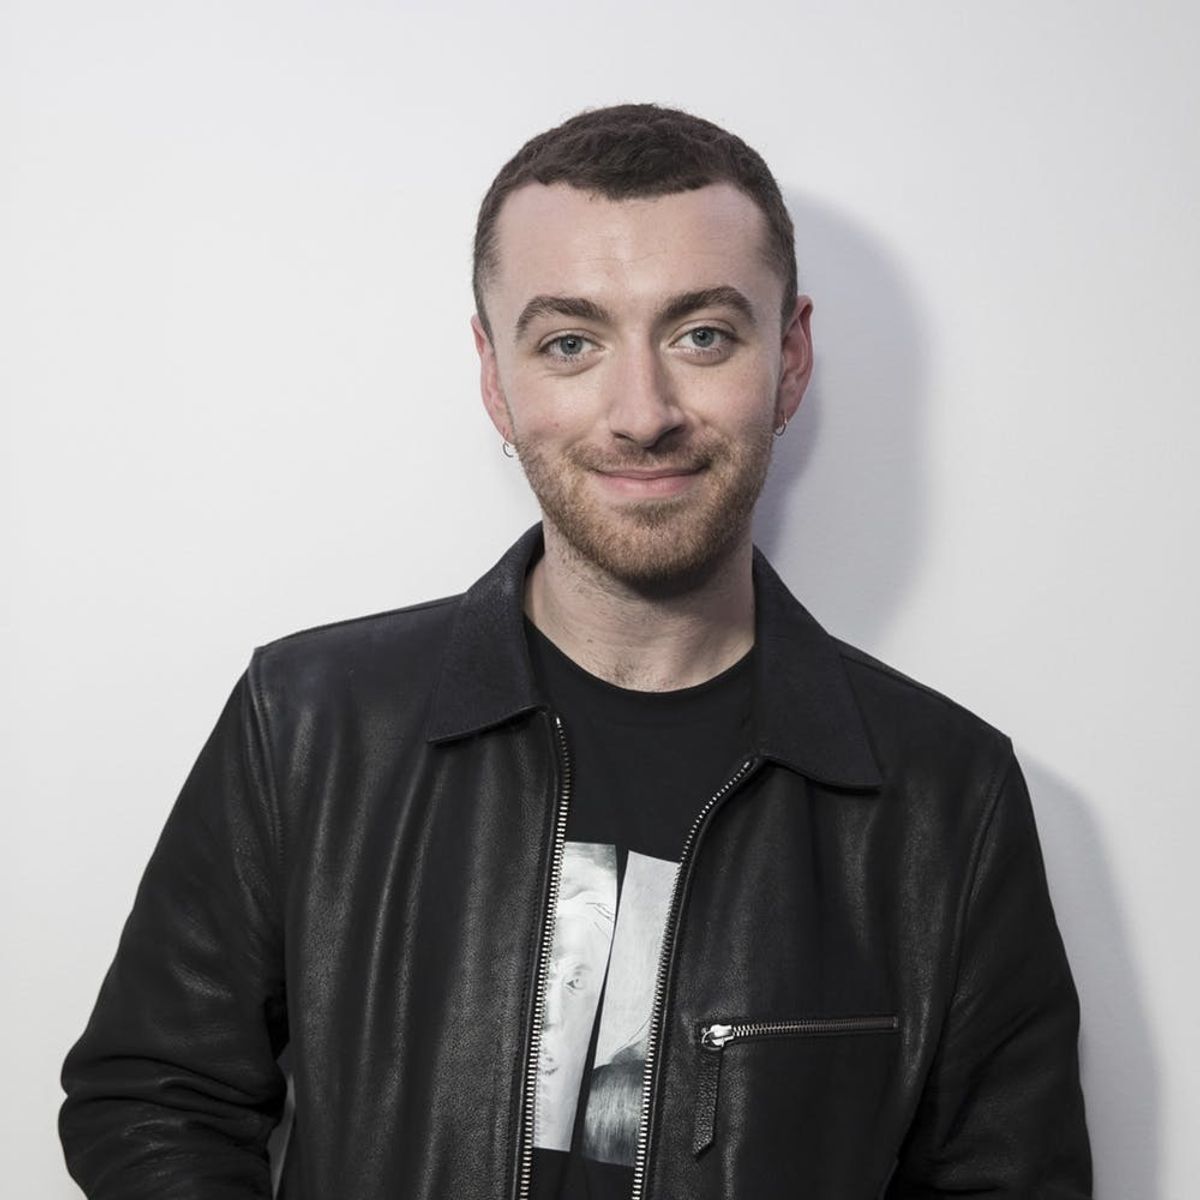 Sam Smith Surprised These Brides With a Special Performance on Their Wedding Day